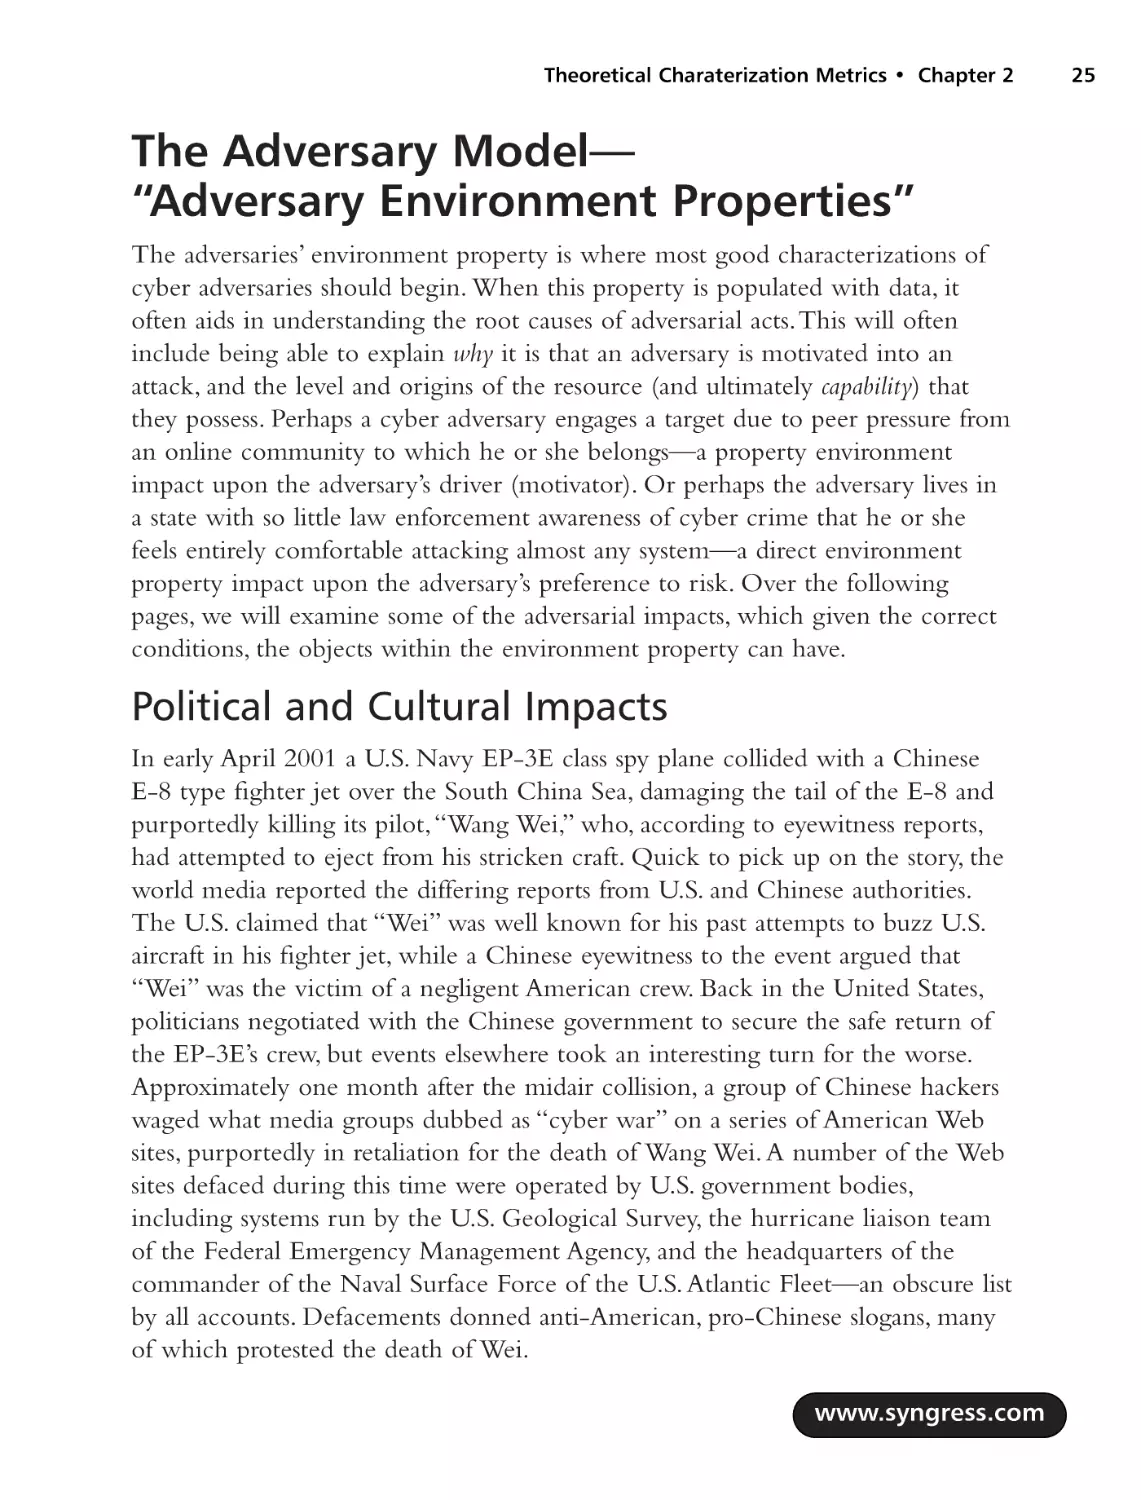 The Adversary Model-"Adversary Environment Properties"
Political and Cultural Impacts